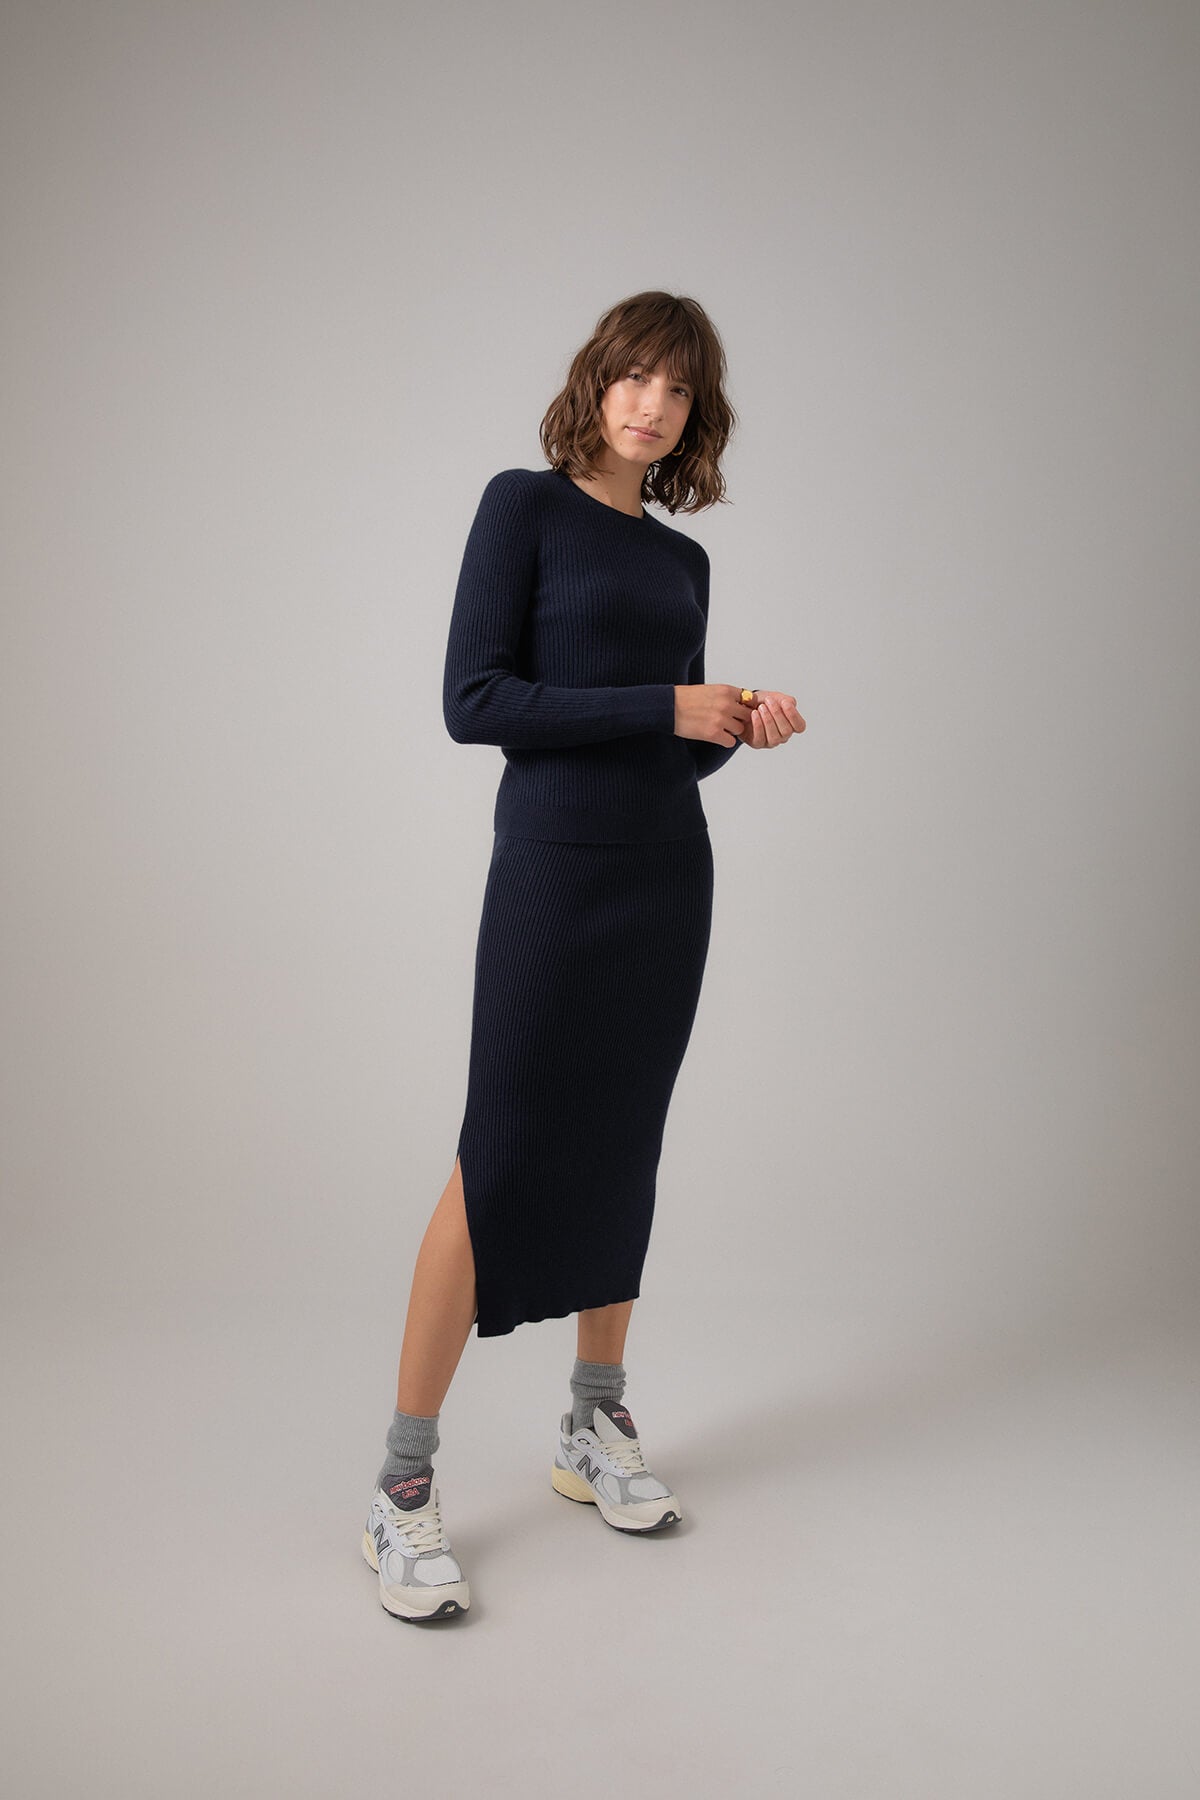 Johnstons of Elgin Ribbed Tube Cashmere Skirt in Dark Navy worn with matching Slim Fit Cashmere Sweater on a grey background KBP00923SD7286